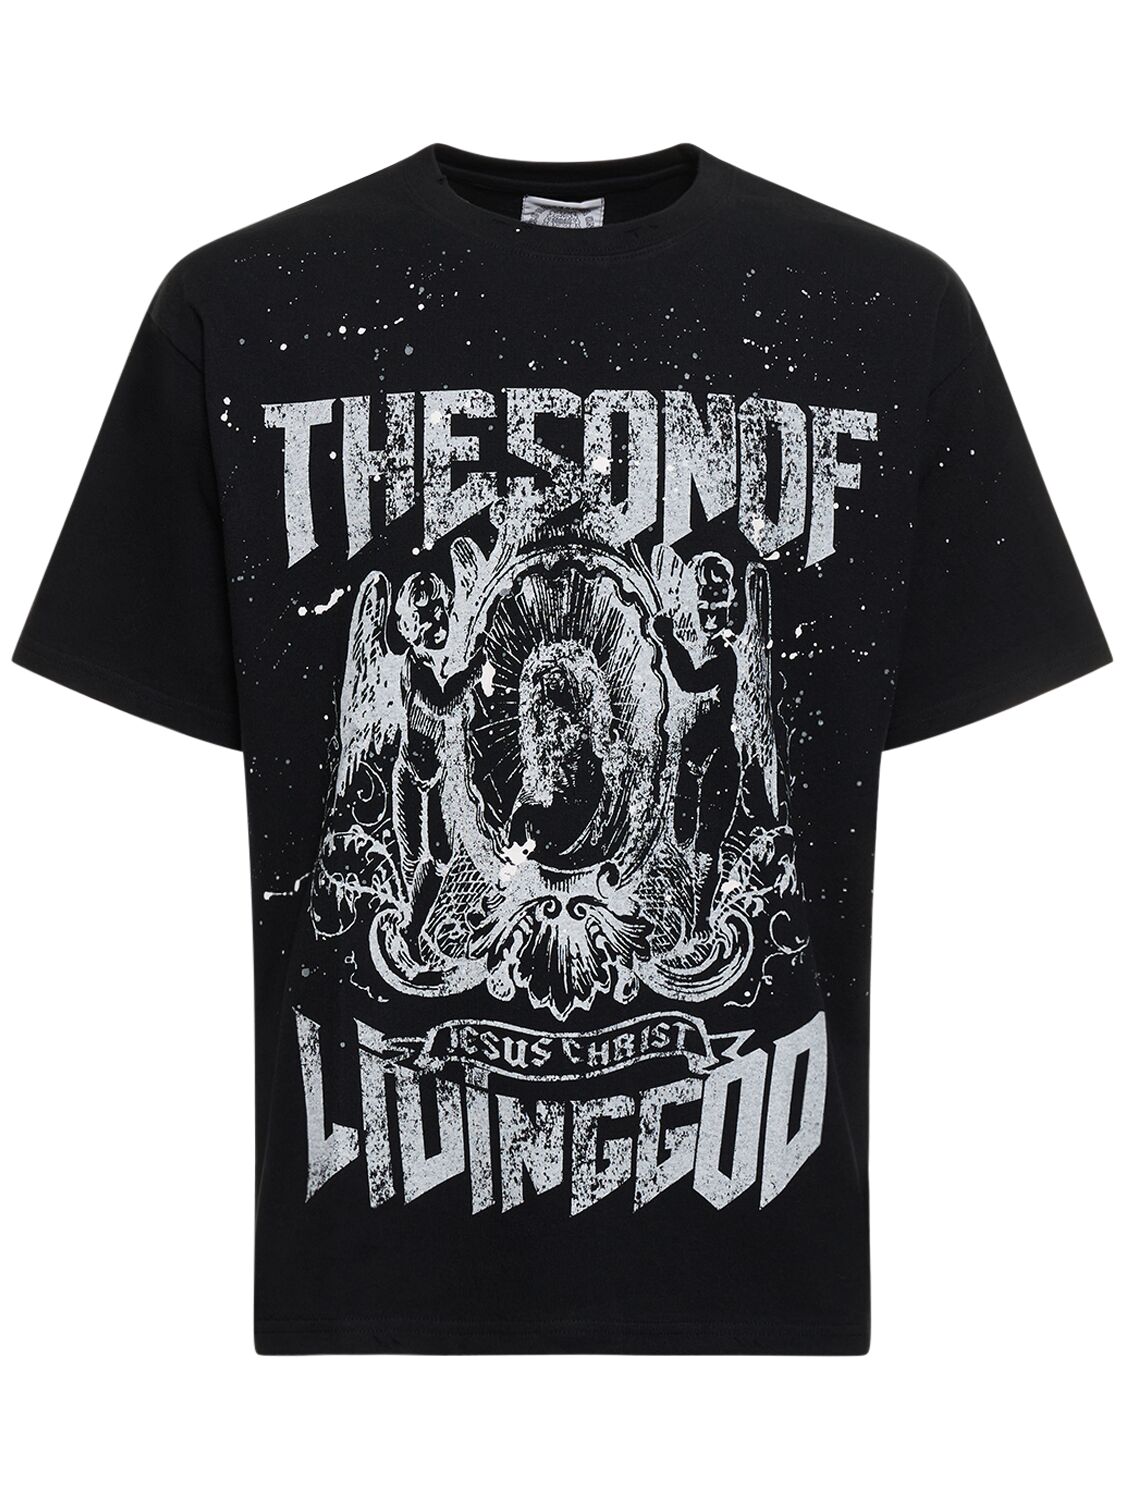 Someit S.o.g. Printed Cotton T-shirt In Black